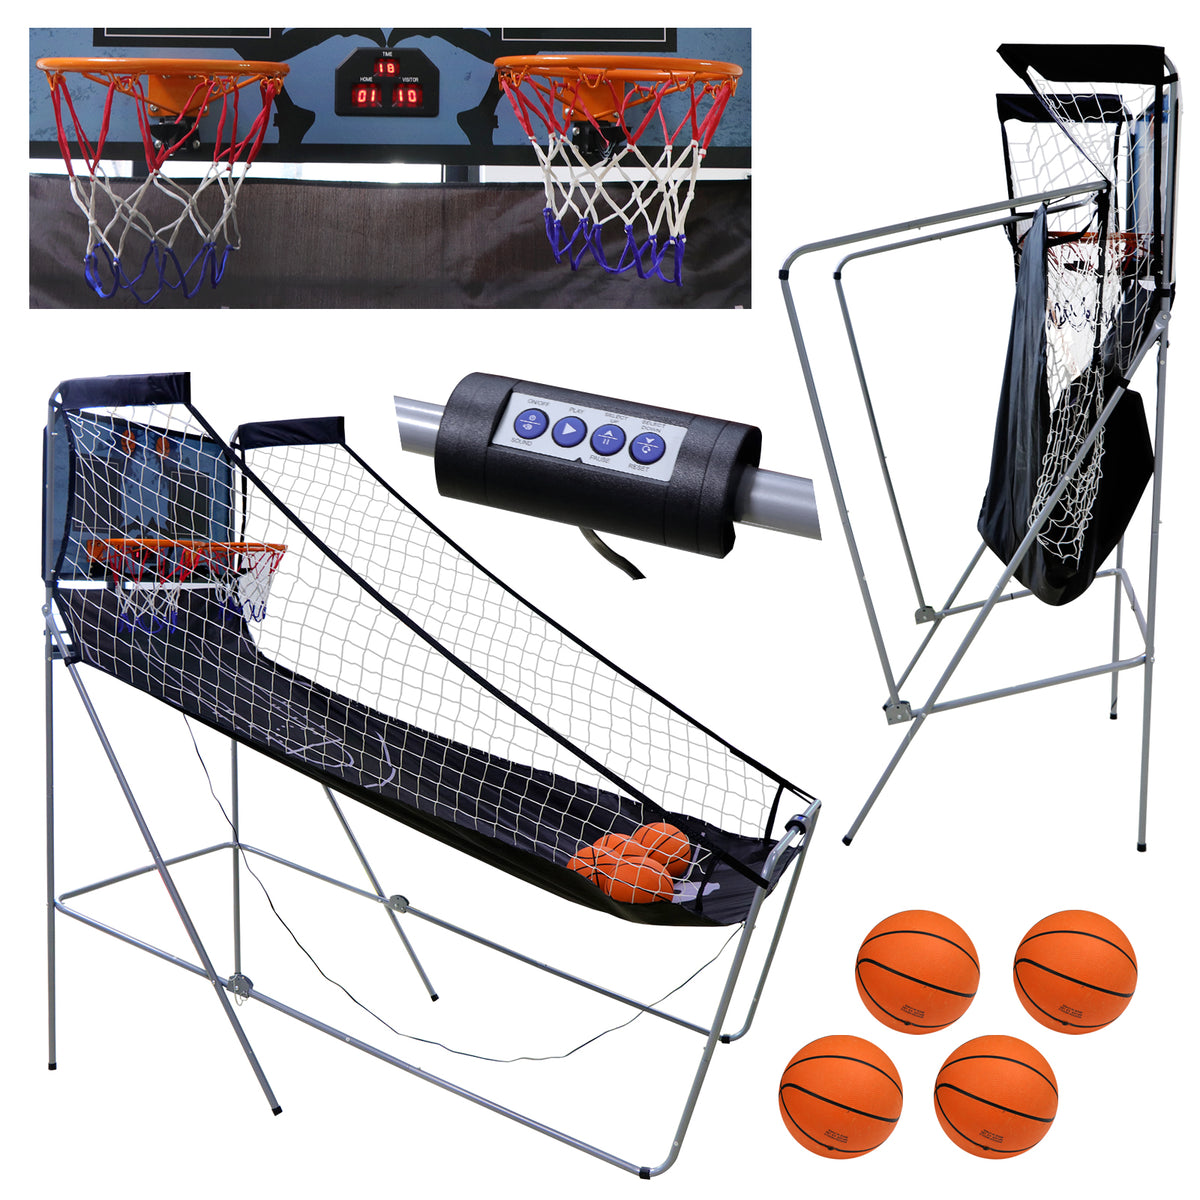 Sunnydaze 2-Player Indoor Basketball Game with Electronic Scorer